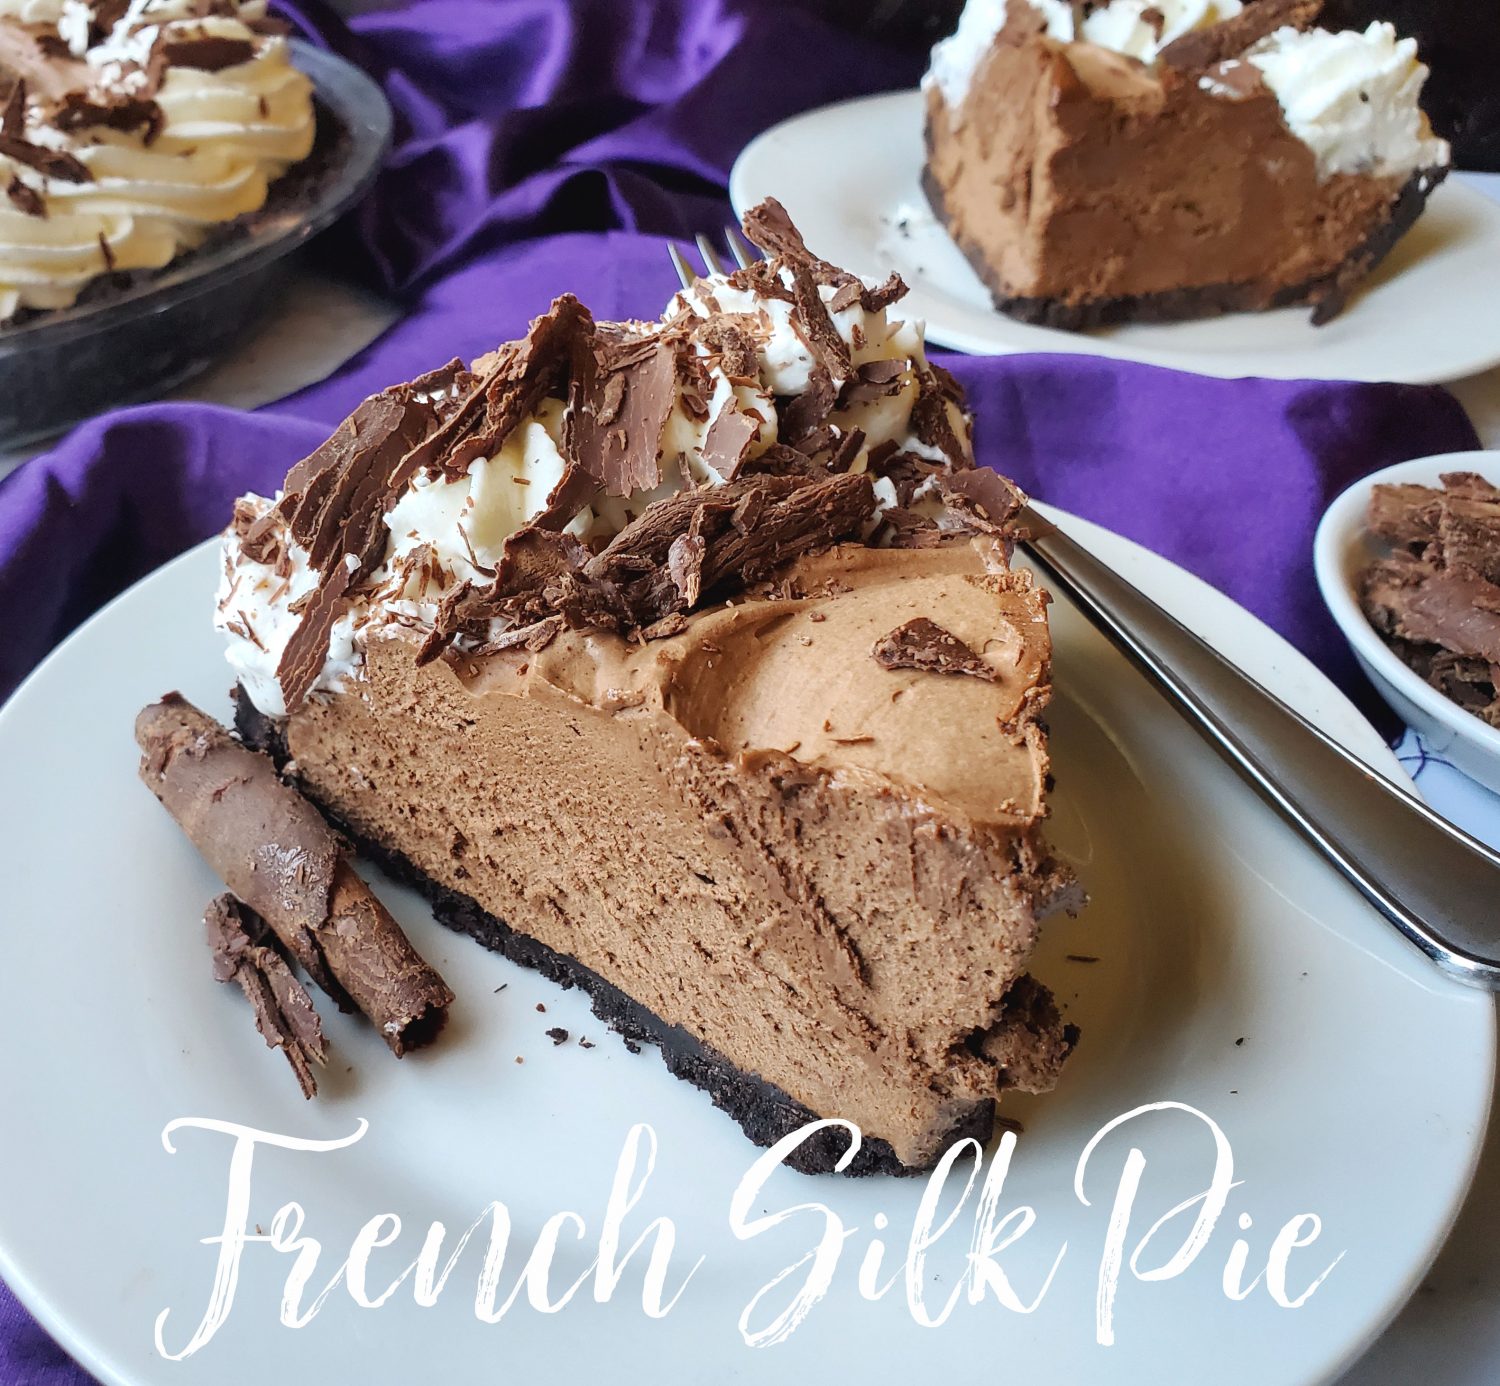 French Silk Pie is a super dreamy creamy mousse-type chocolate pie; every bite is light and velvety smooth, and garnished with homemade chocolate curls.  